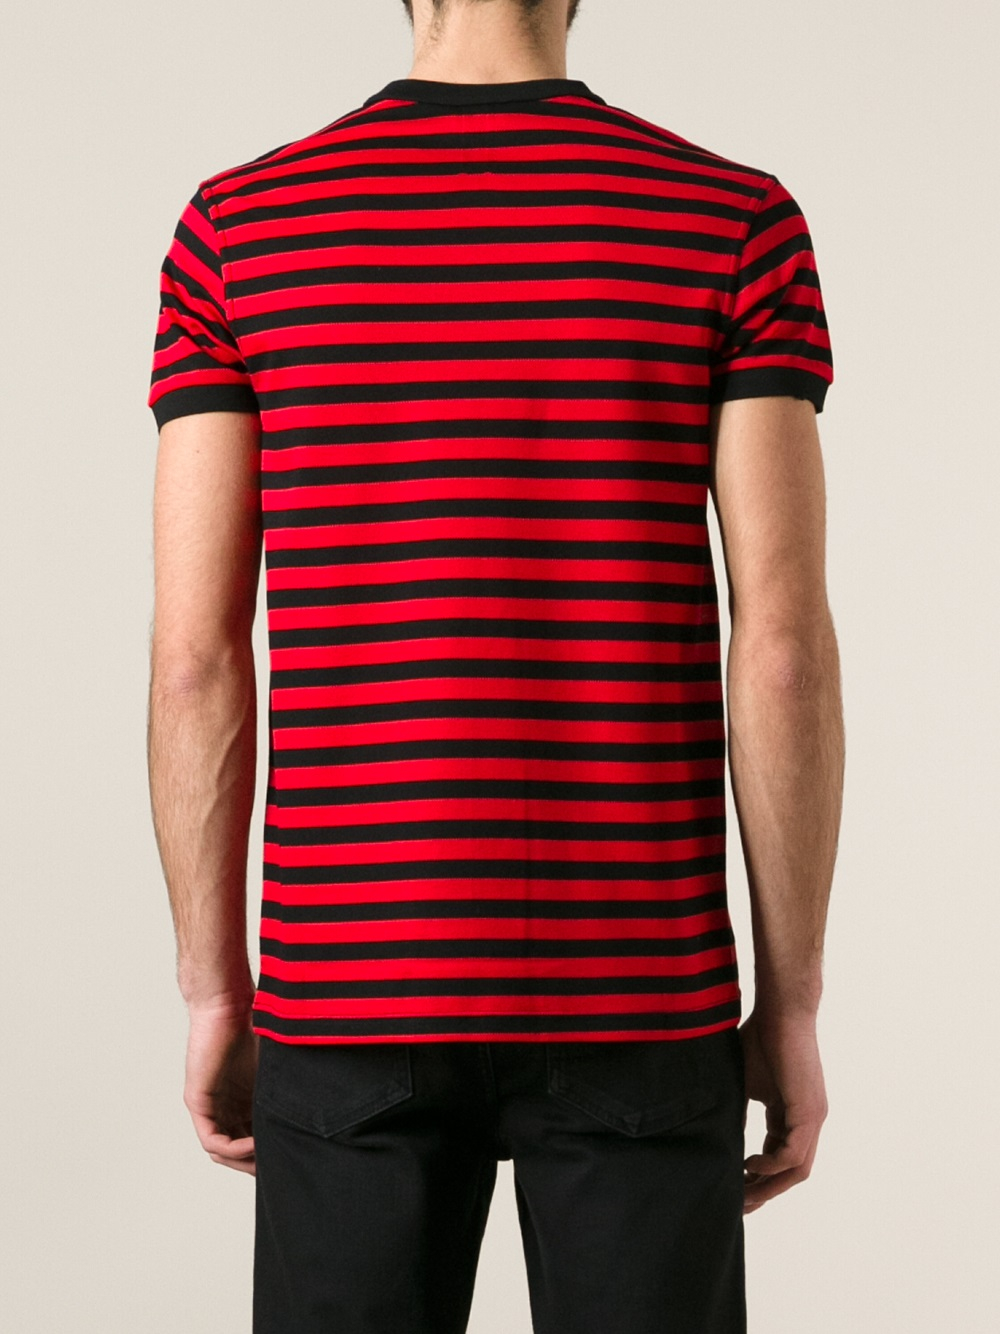 Saint Laurent Striped Polo Shirt in Black (Red) for Men | Lyst